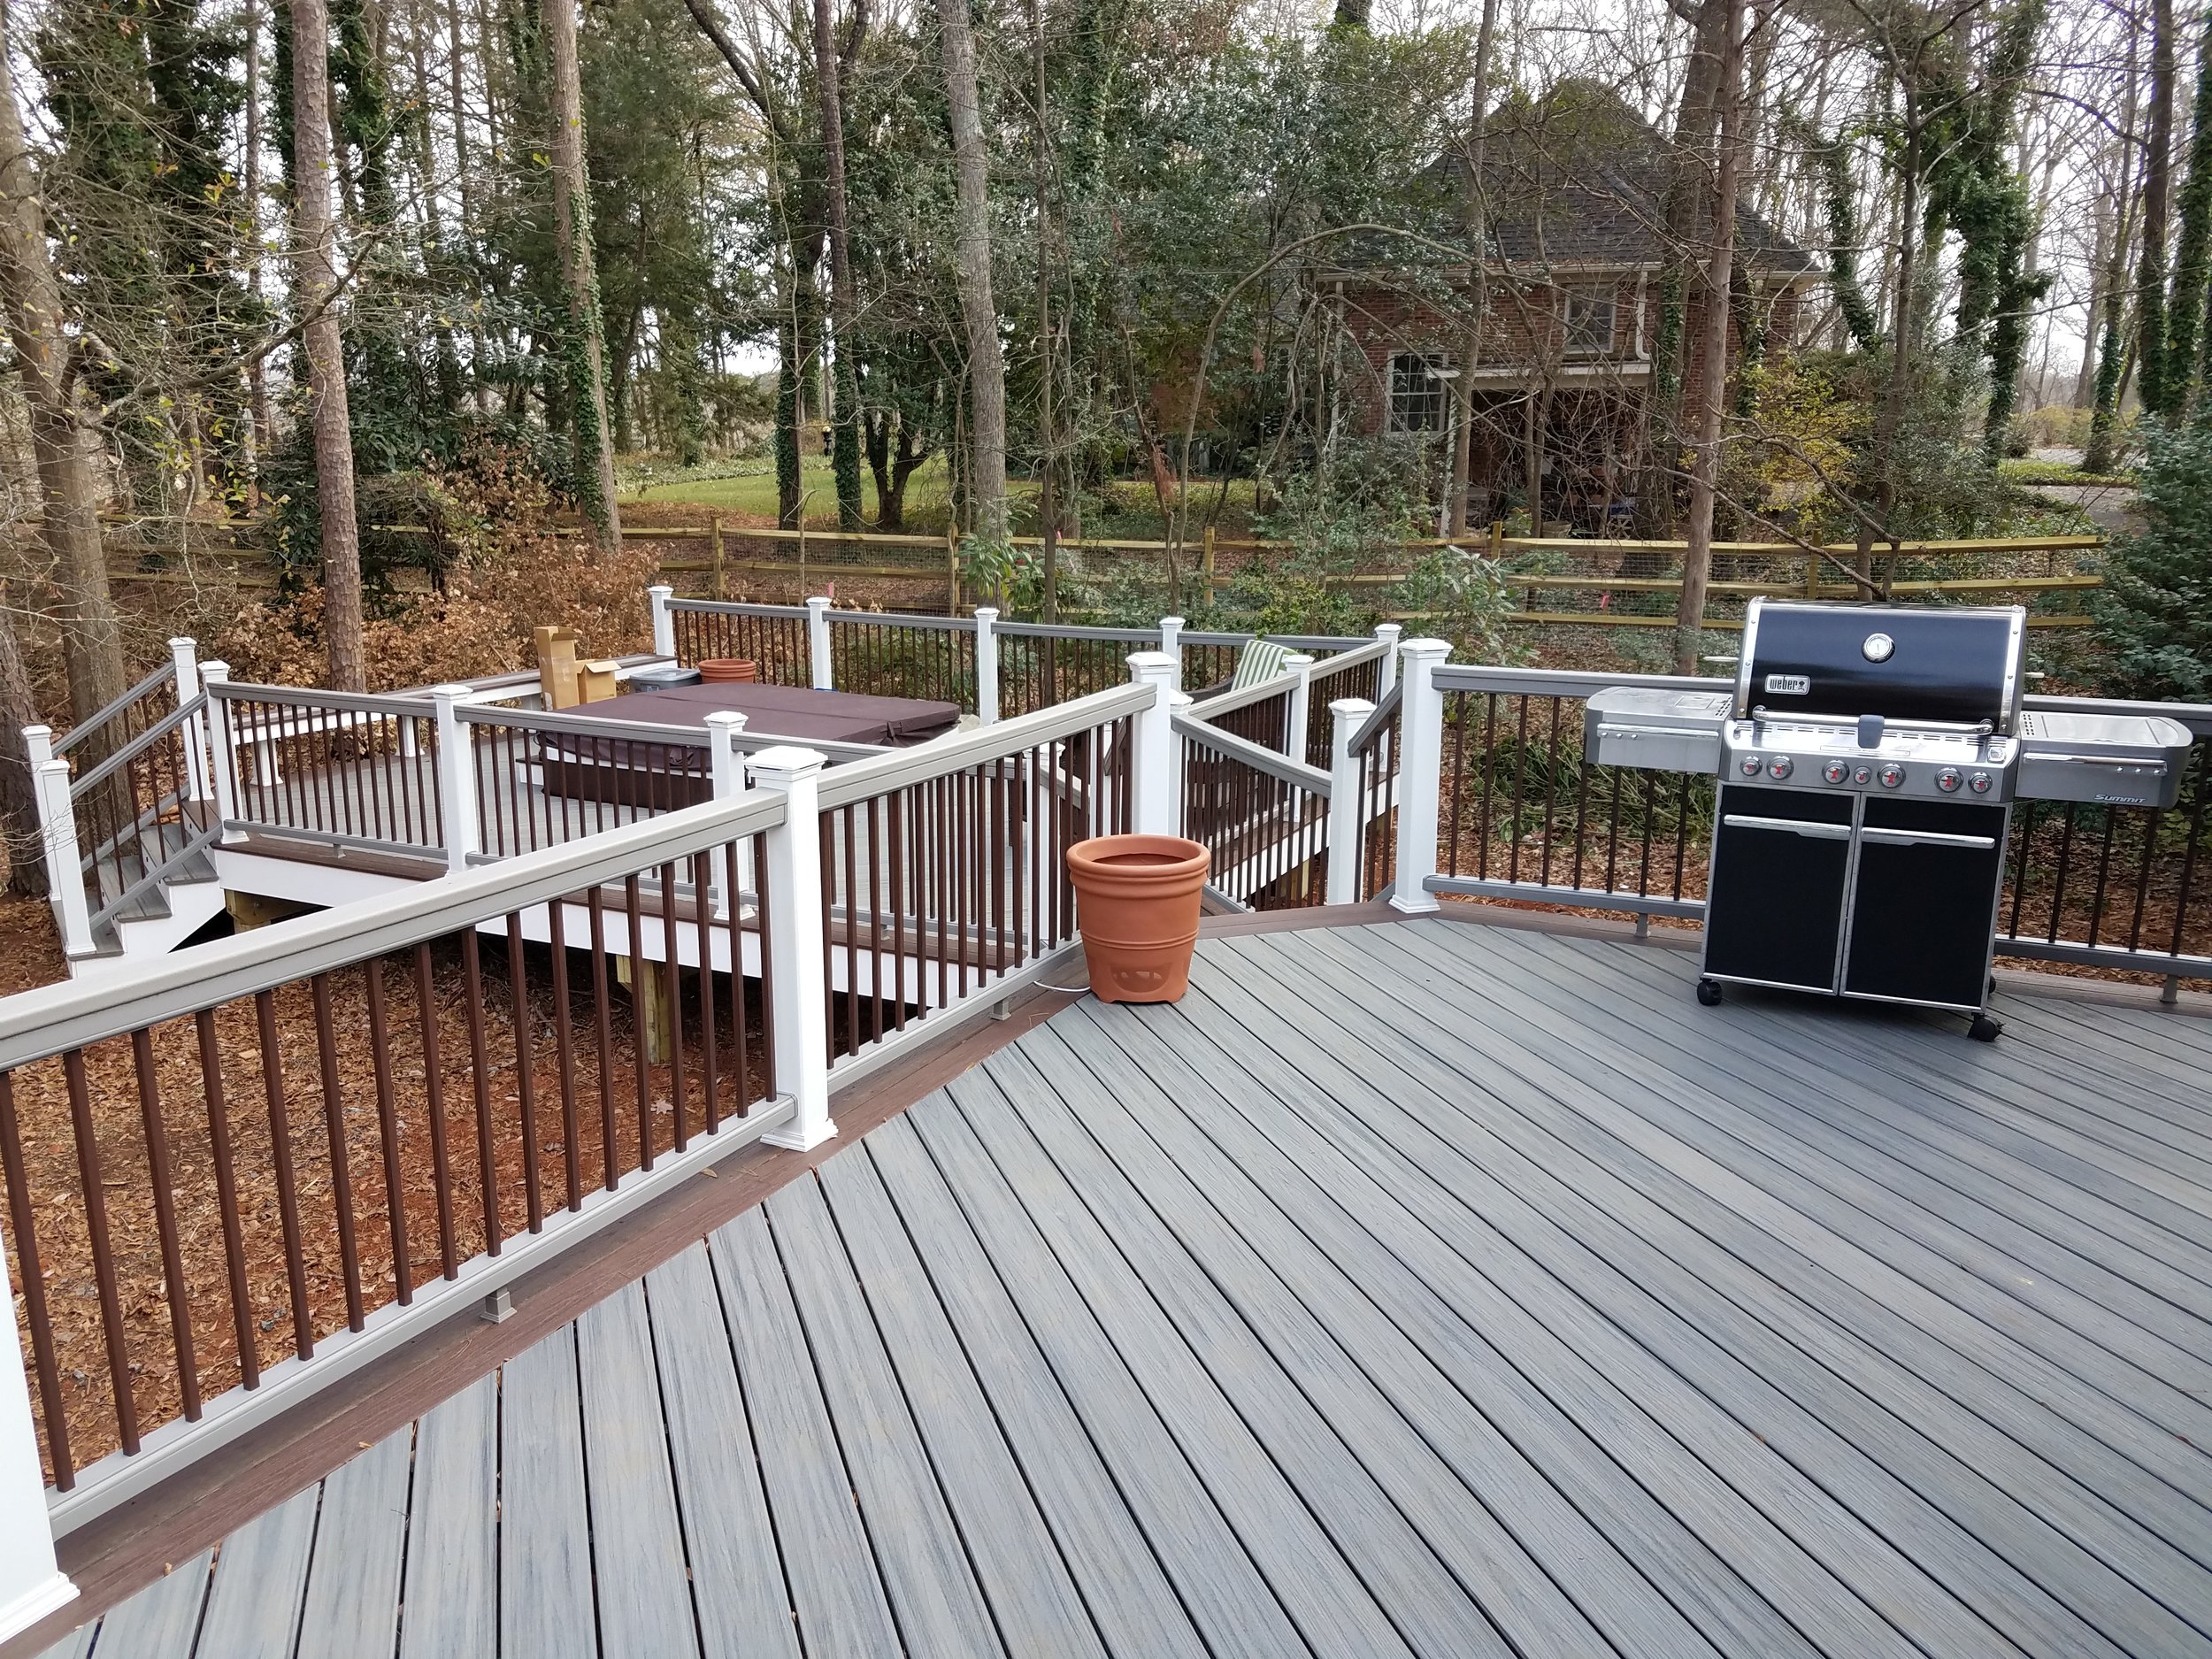 Trex Deck with Hot Tub and Golf Course View.